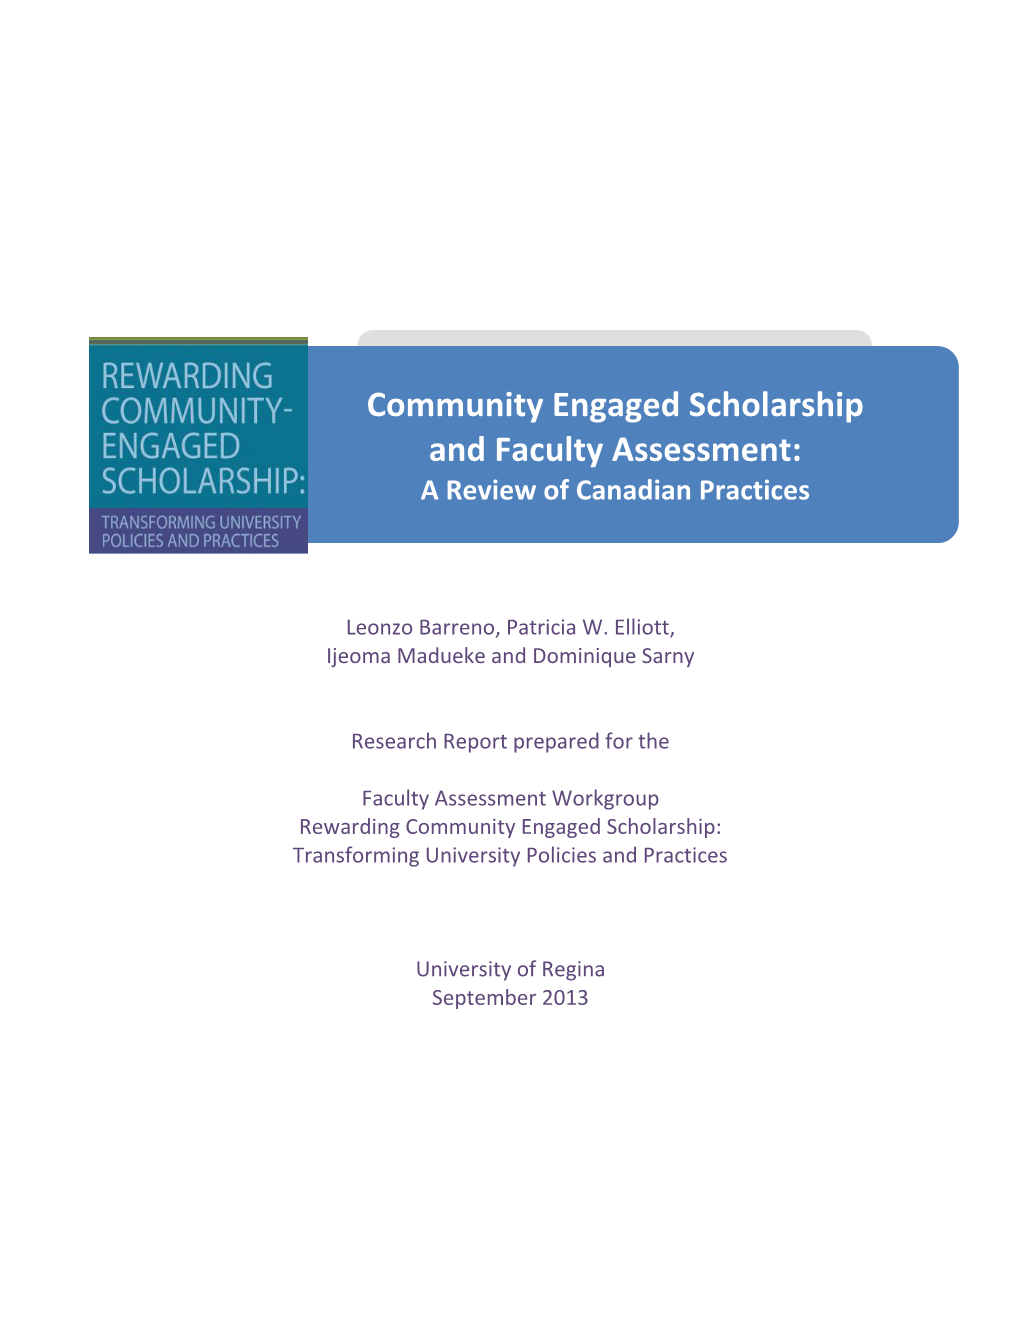 Community Engaged Scholarship and Faculty Assessment: a Review of Canadian Practices